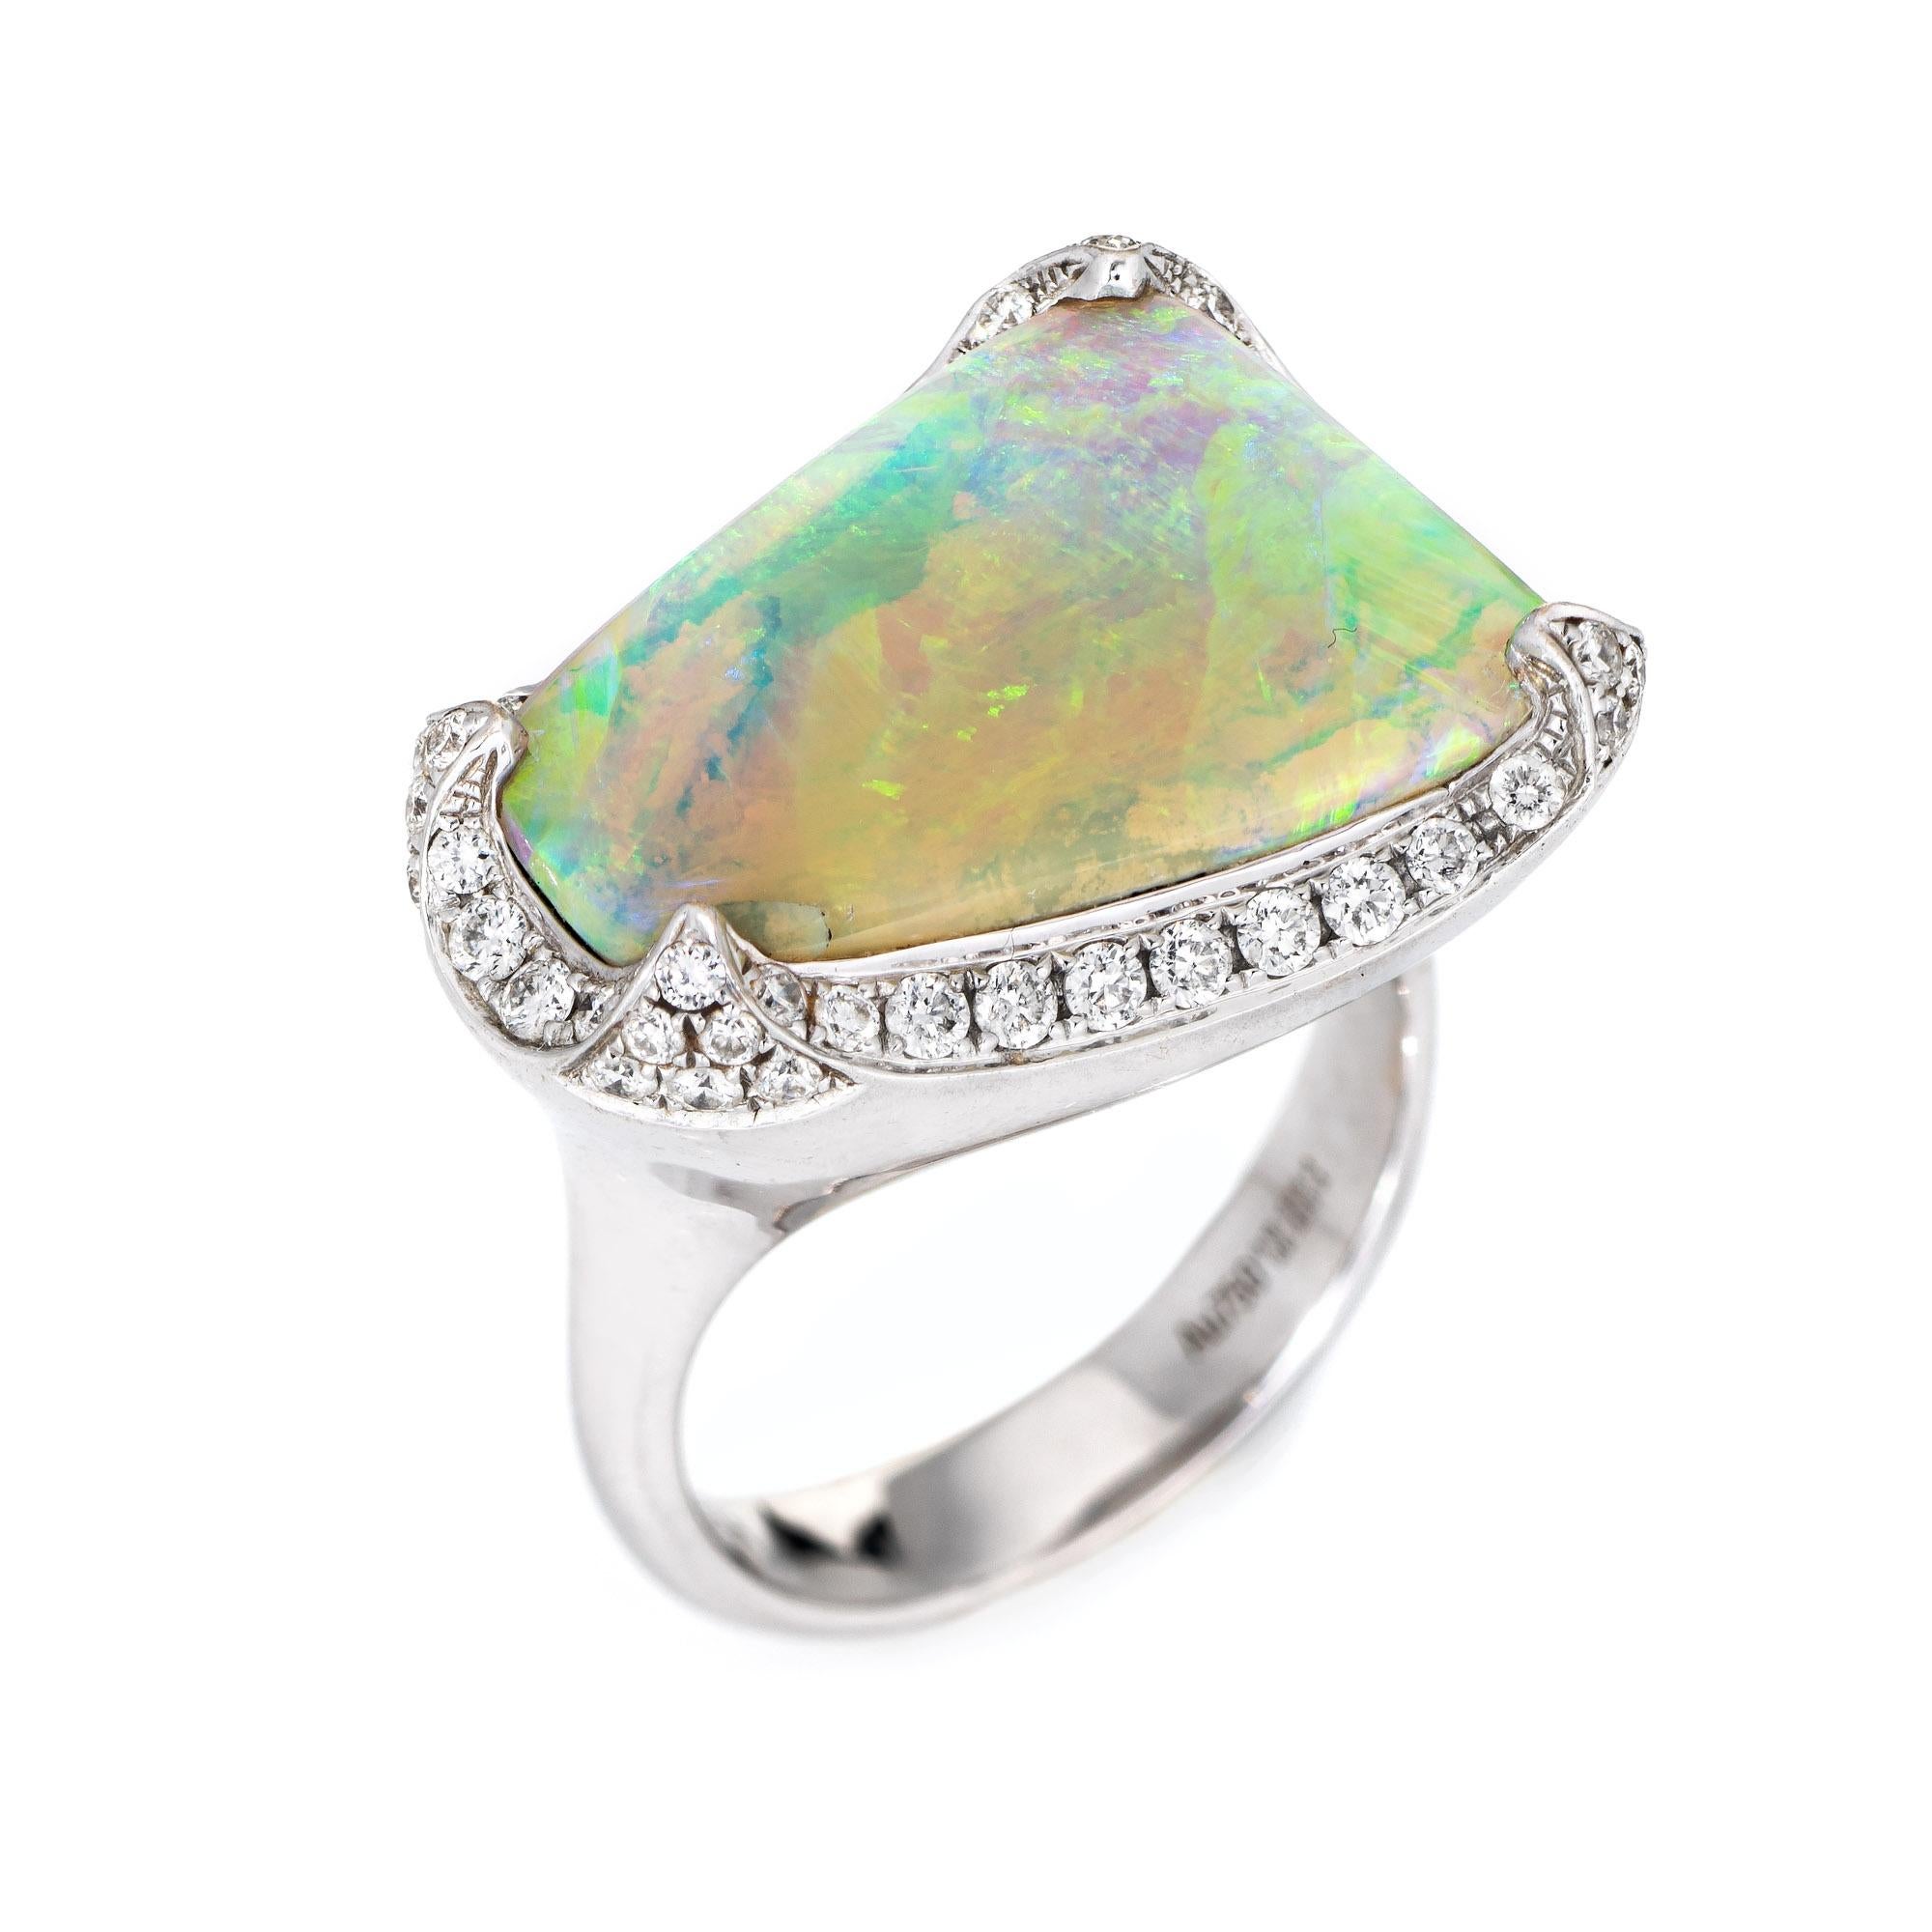 Stylish contemporary opal & diamond cocktail ring (circa 2000s) crafted in 18 karat white gold. 

Natural opal measures 19mm x 14mm (estimated at 10.64 carats) is accented with an estimated 0.85 carats of diamonds (estimated at H-I color and VS2-SI1